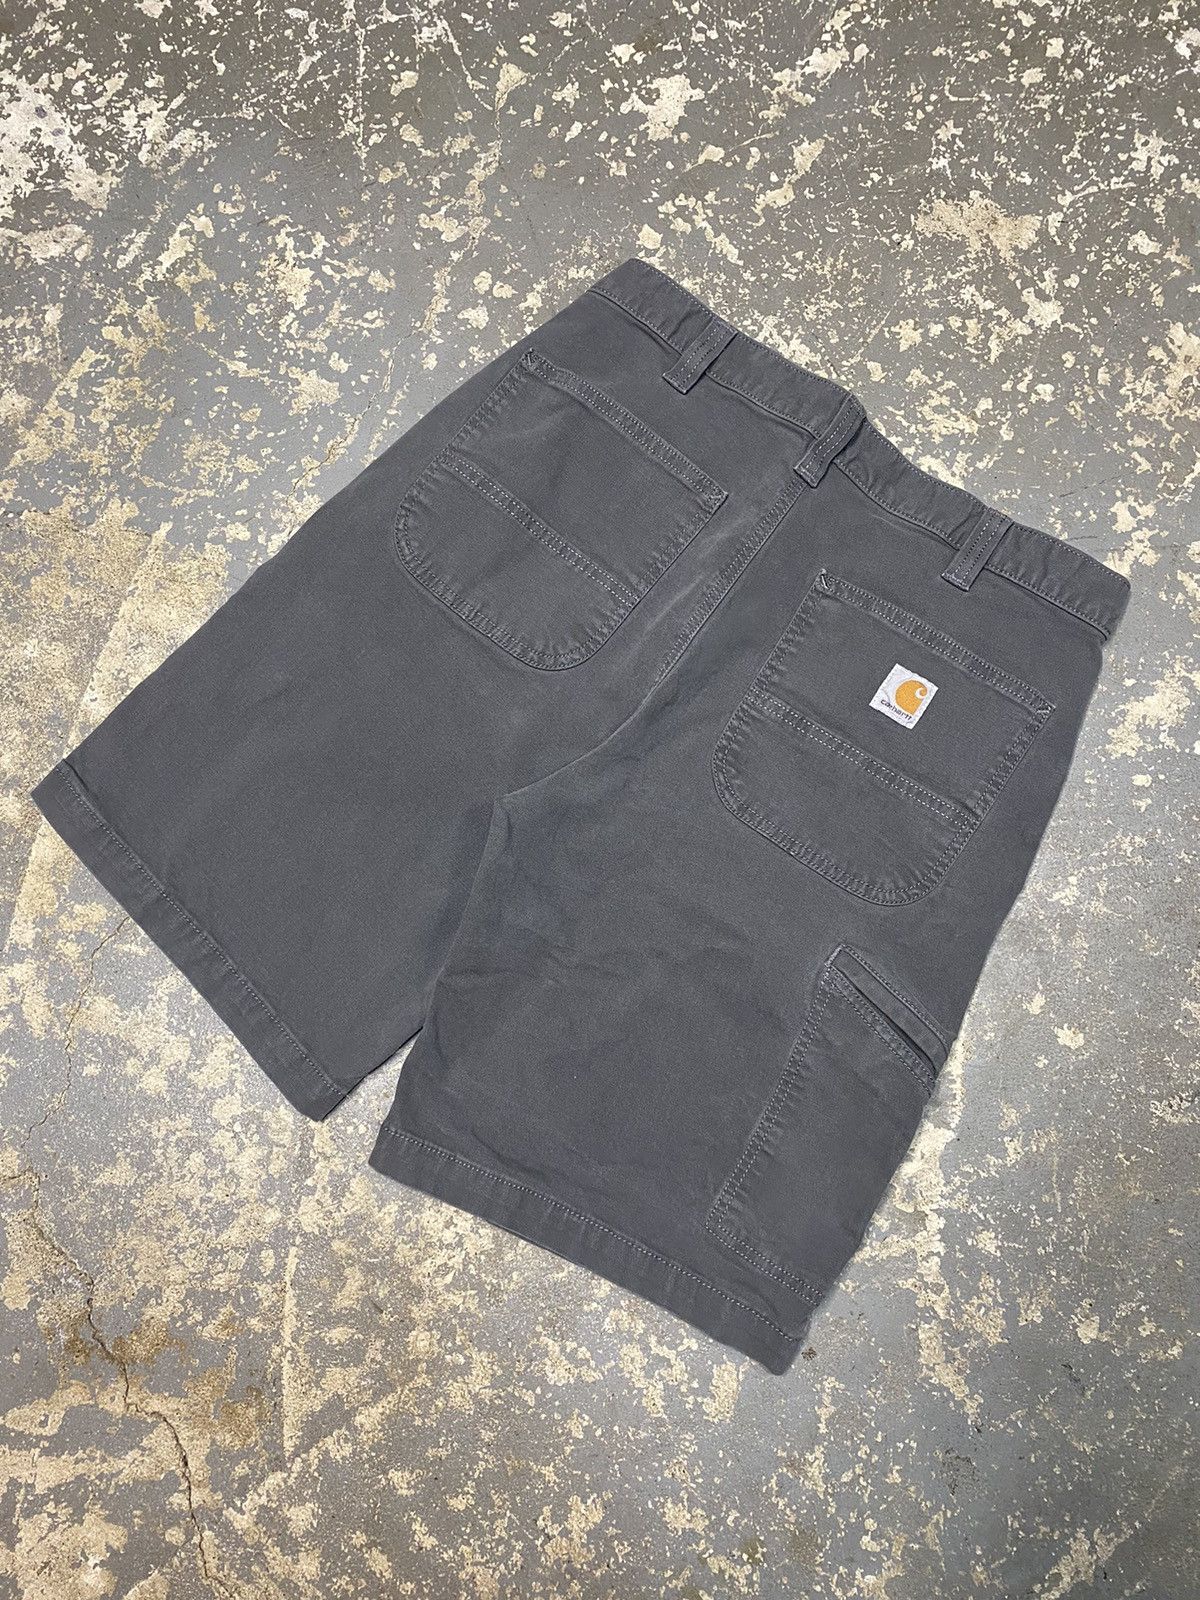 Vintage Carhartt Relaxed Fit Cargo Baggy Shorts Gray Jorts | Grailed